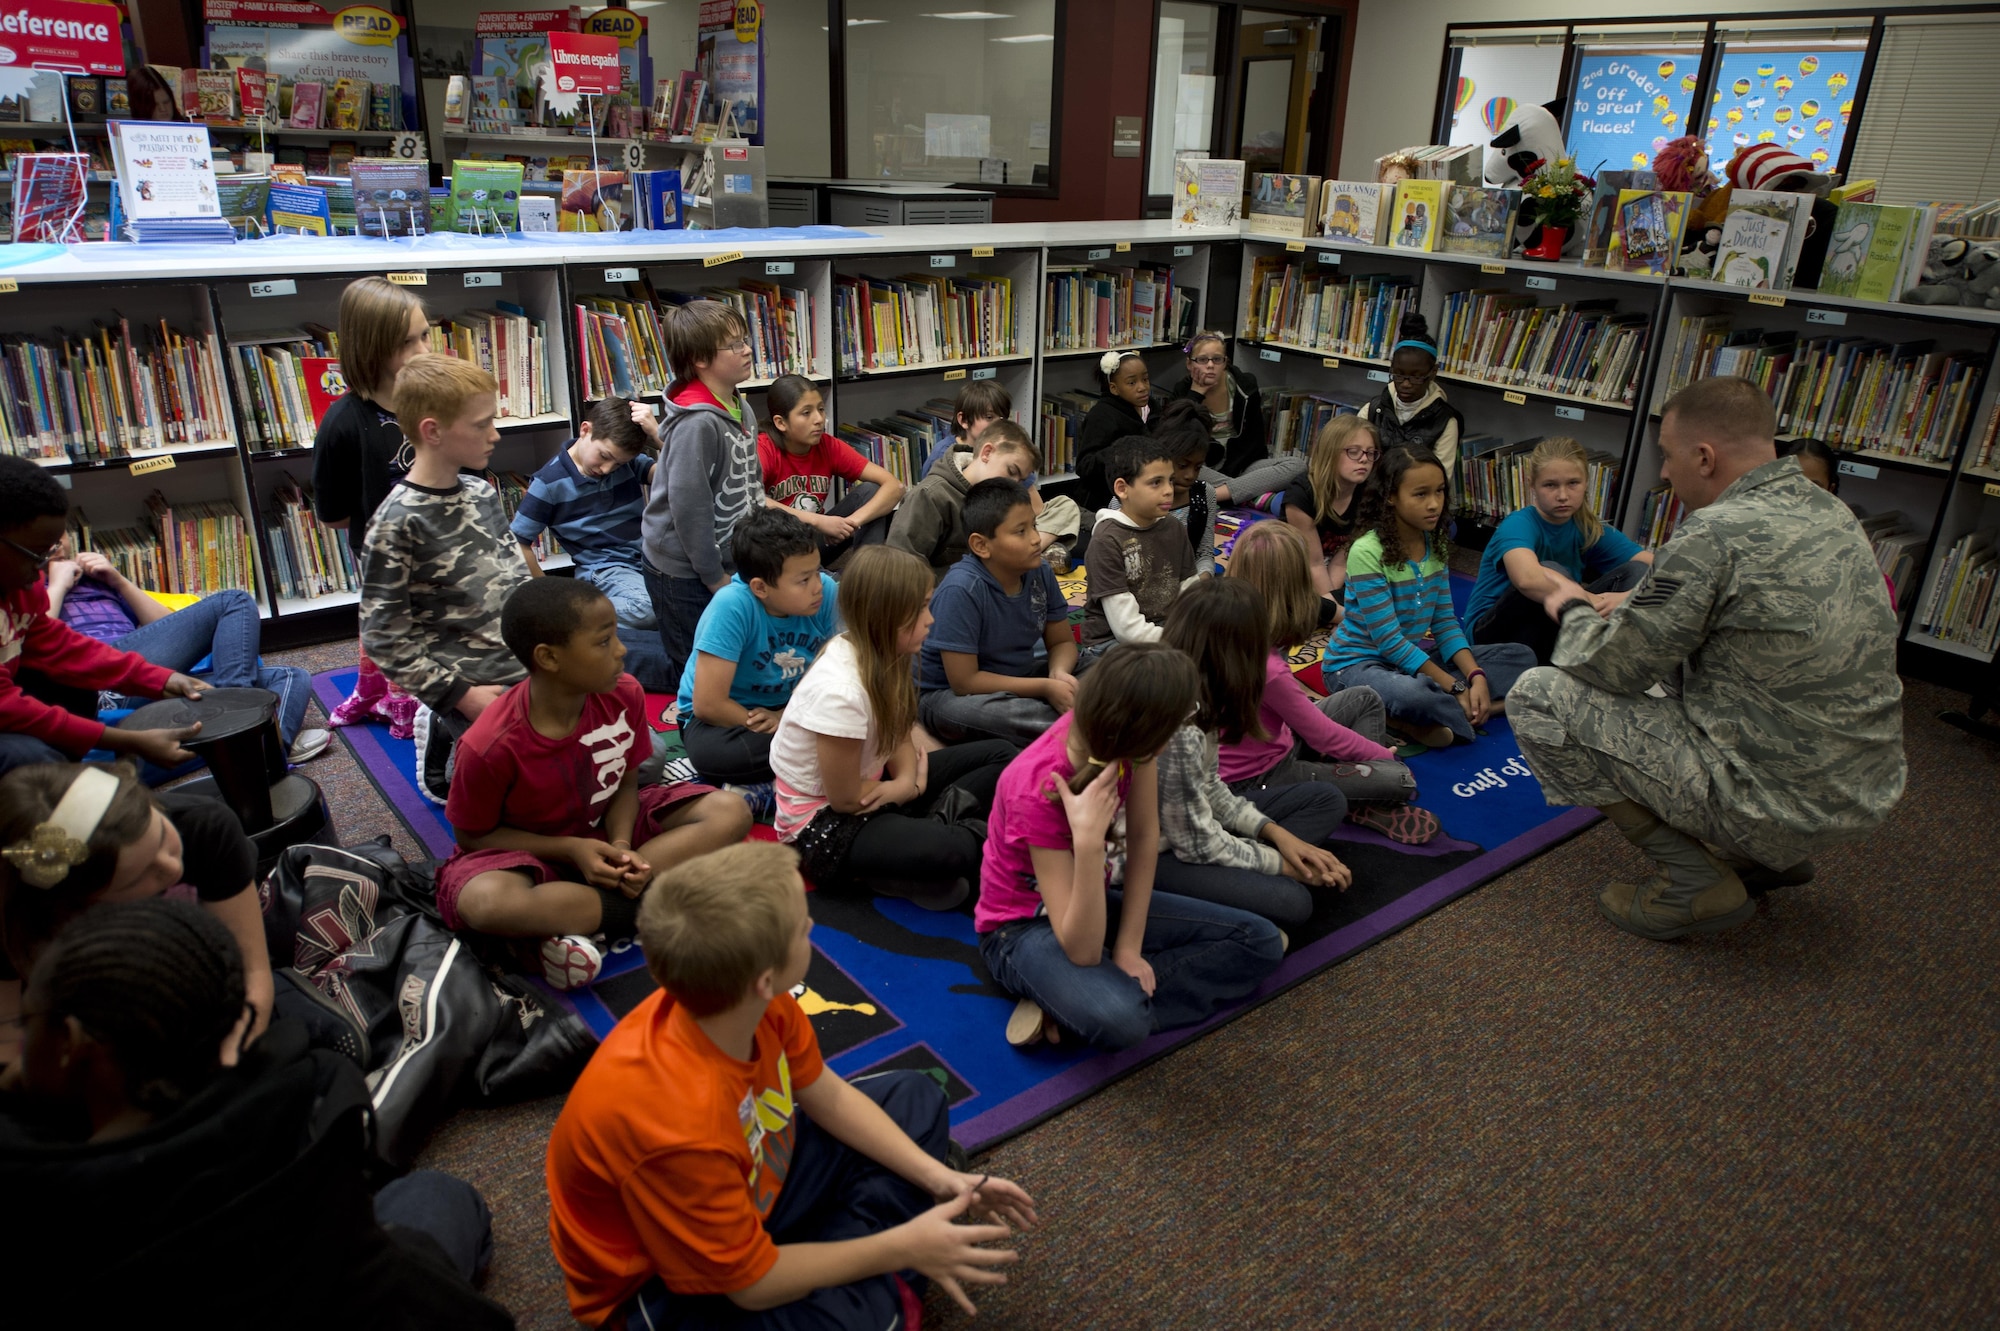 Tech. Sgt. Matthew Zien speaks to students for Veterans Day Nov. 13, 2013, at Cimarron Elementary in Aurora, Colo. Zien hit his lowest low when he nearly lost his life in 2012 to medical issues, and relapsed into post-traumatic stress syndrome. He uses public speaking engagements and mentoring sessions to inspire resiliency for both the public and the Airmen he works with.   